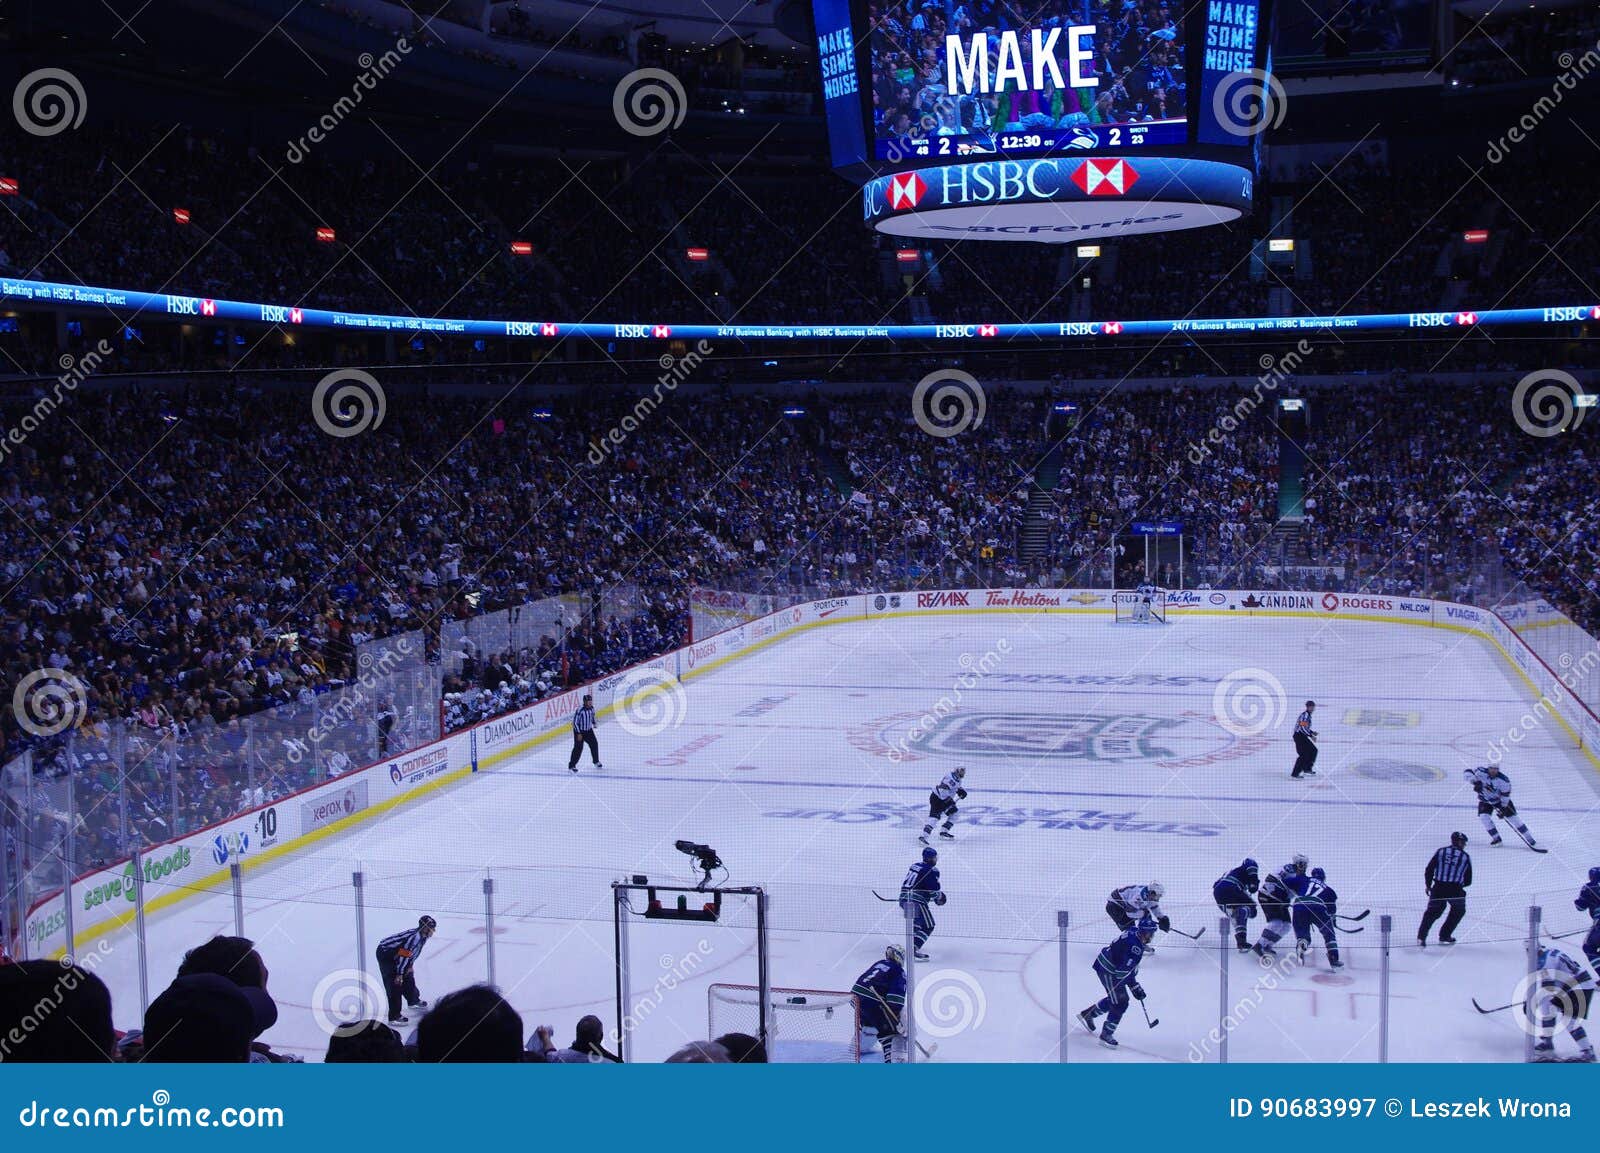 https://thumbs.dreamstime.com/z/stanley-cup-playoffs-game-vancouver-canucks-hockey-rogers-arena-90683997.jpg